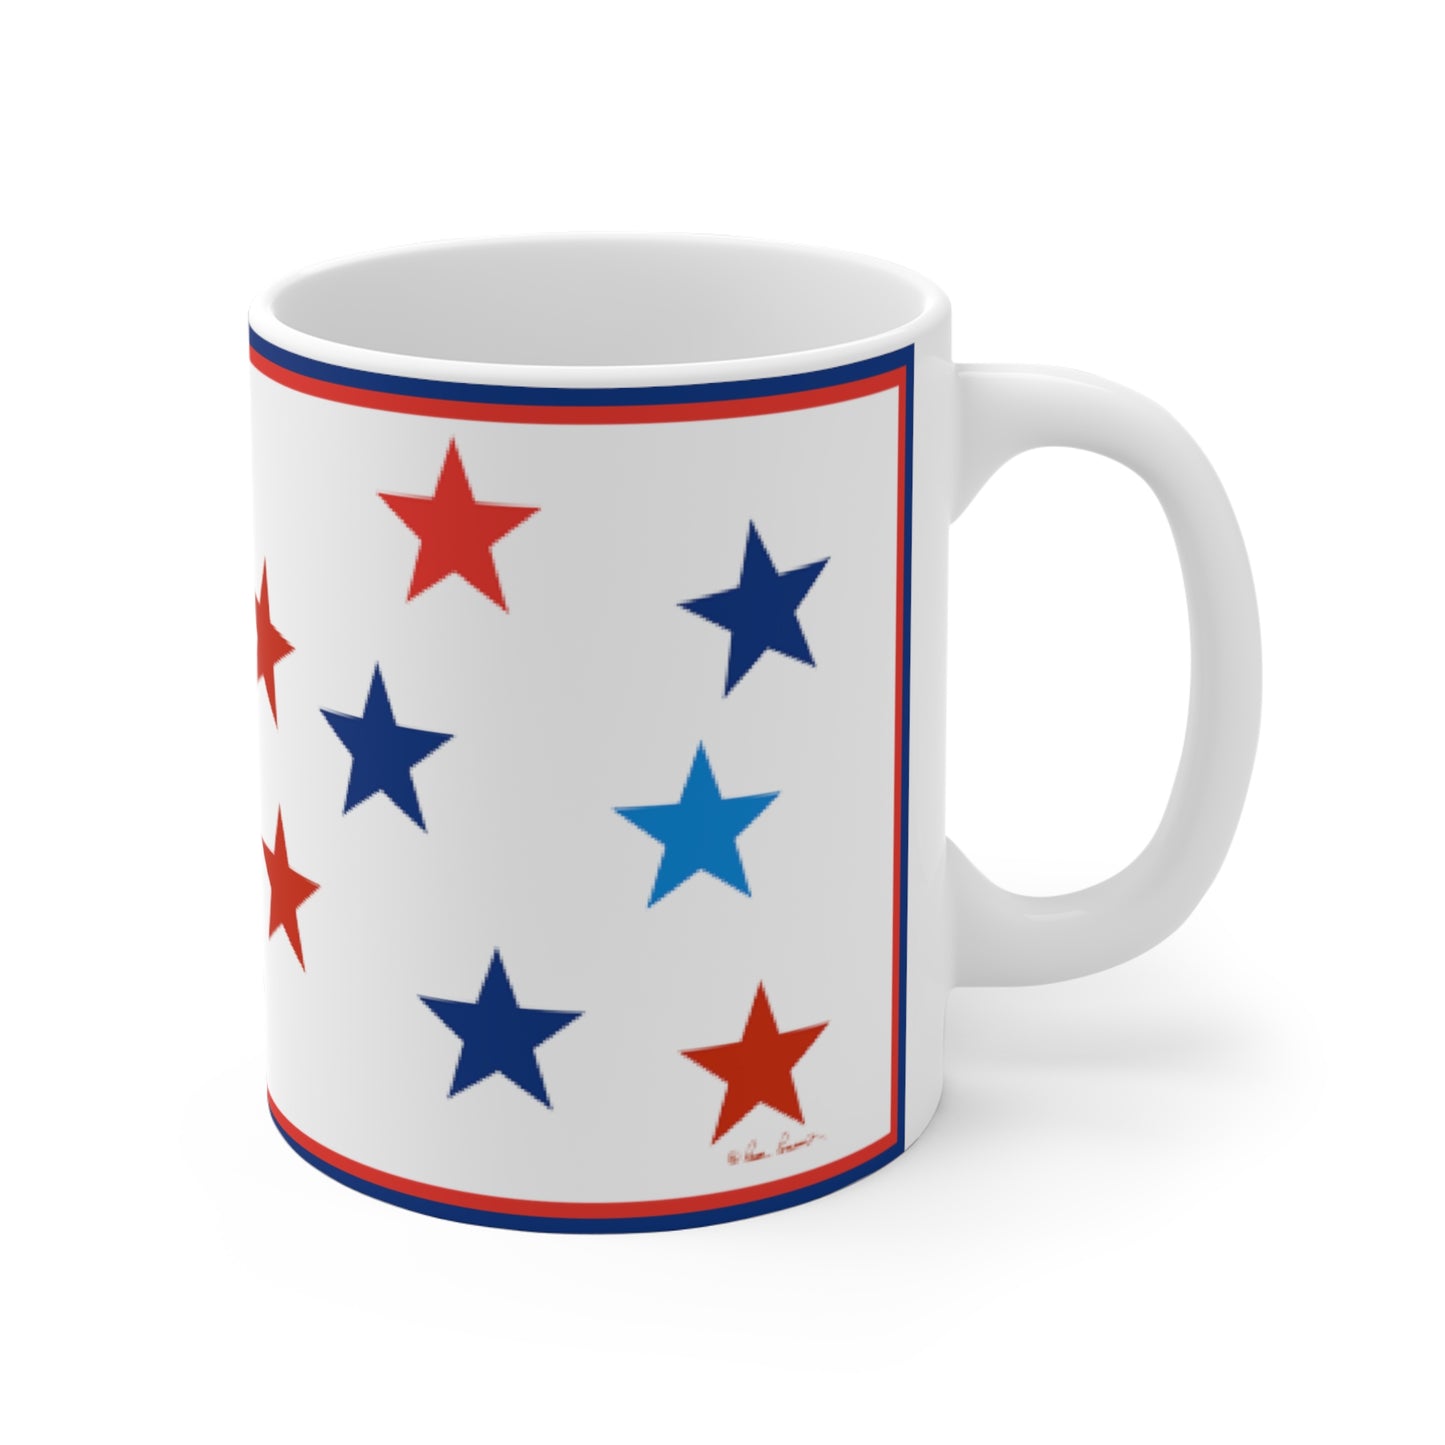 A Mug with Stars: Blue and Red on White; Ceramic; 11 oz. by Printify featuring red and blue stars in a diagonal pattern, bordered by red and blue lines. This patriotic mug is perfect for those who love to display their national pride.